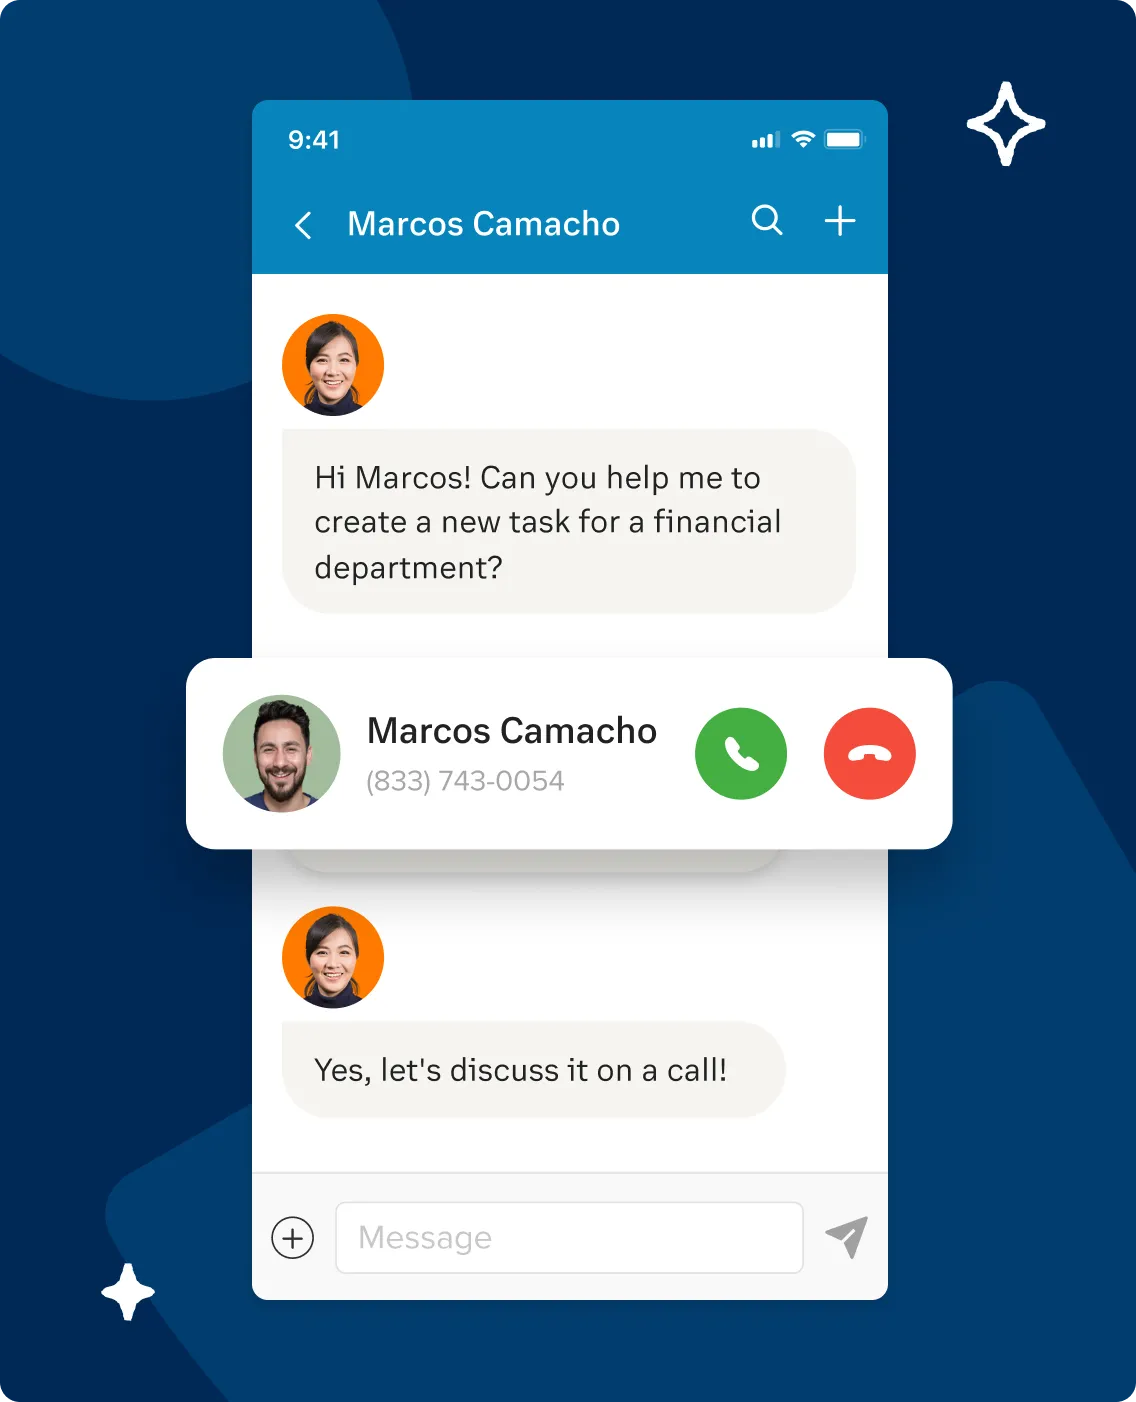 A RingCentral chat between two people discussing about creating a new task for a financial department